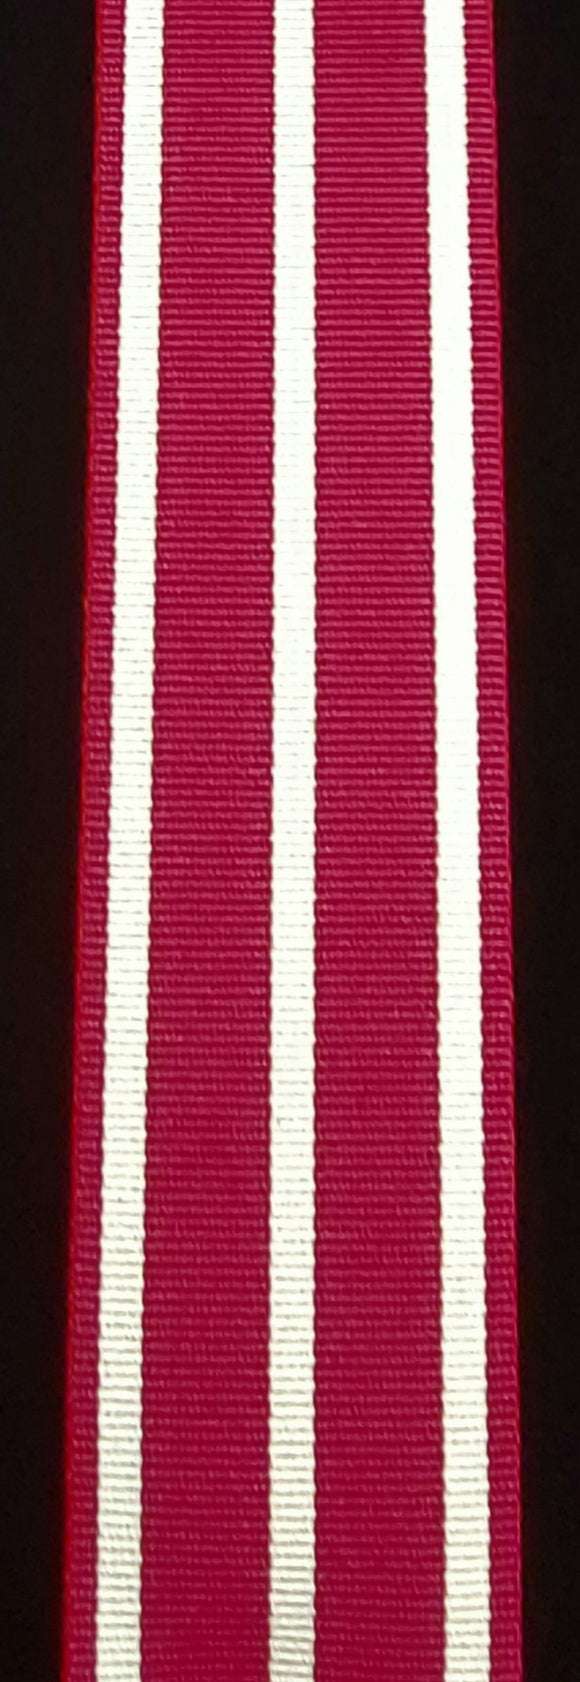 Ribbon, Canadian Medal of Military Valour